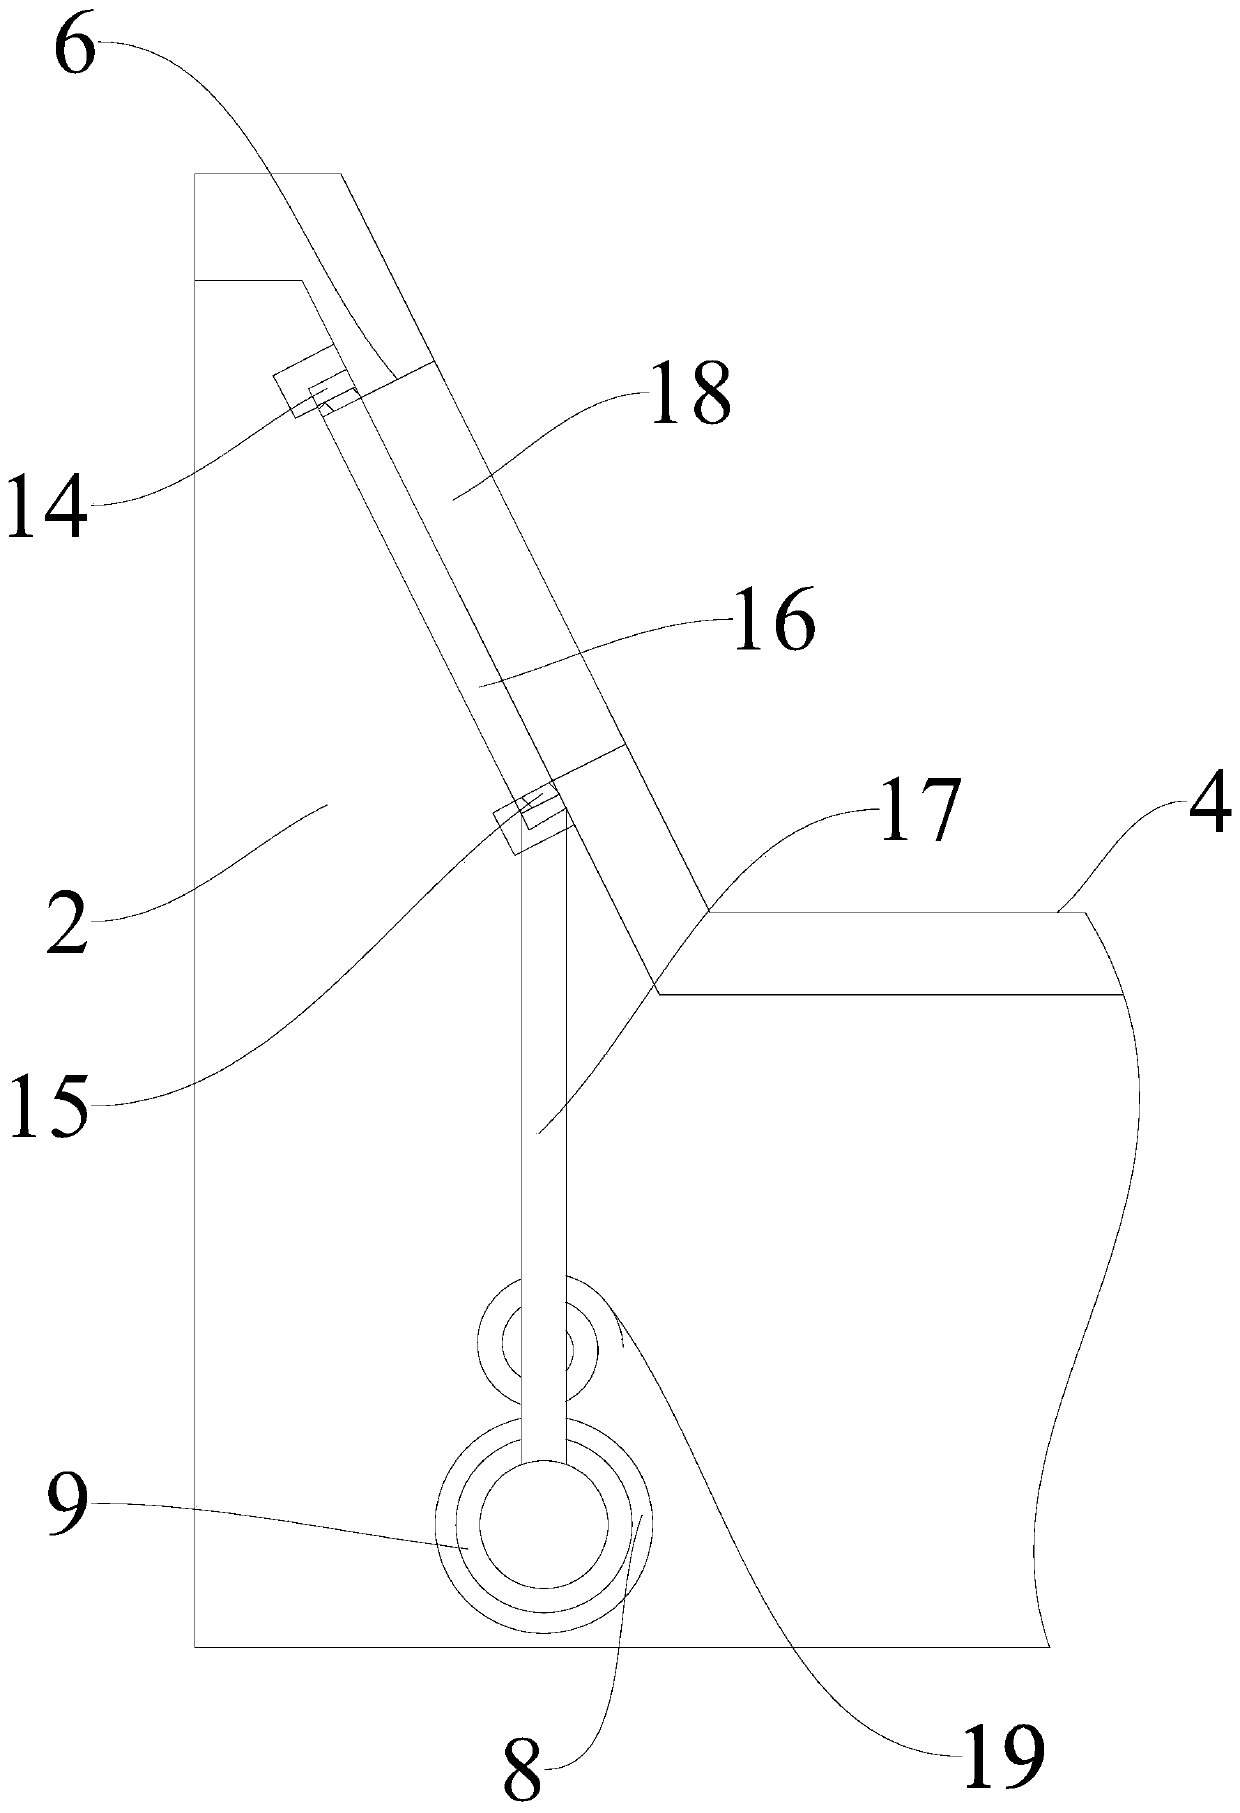 Overhead folding antenna for network communication router